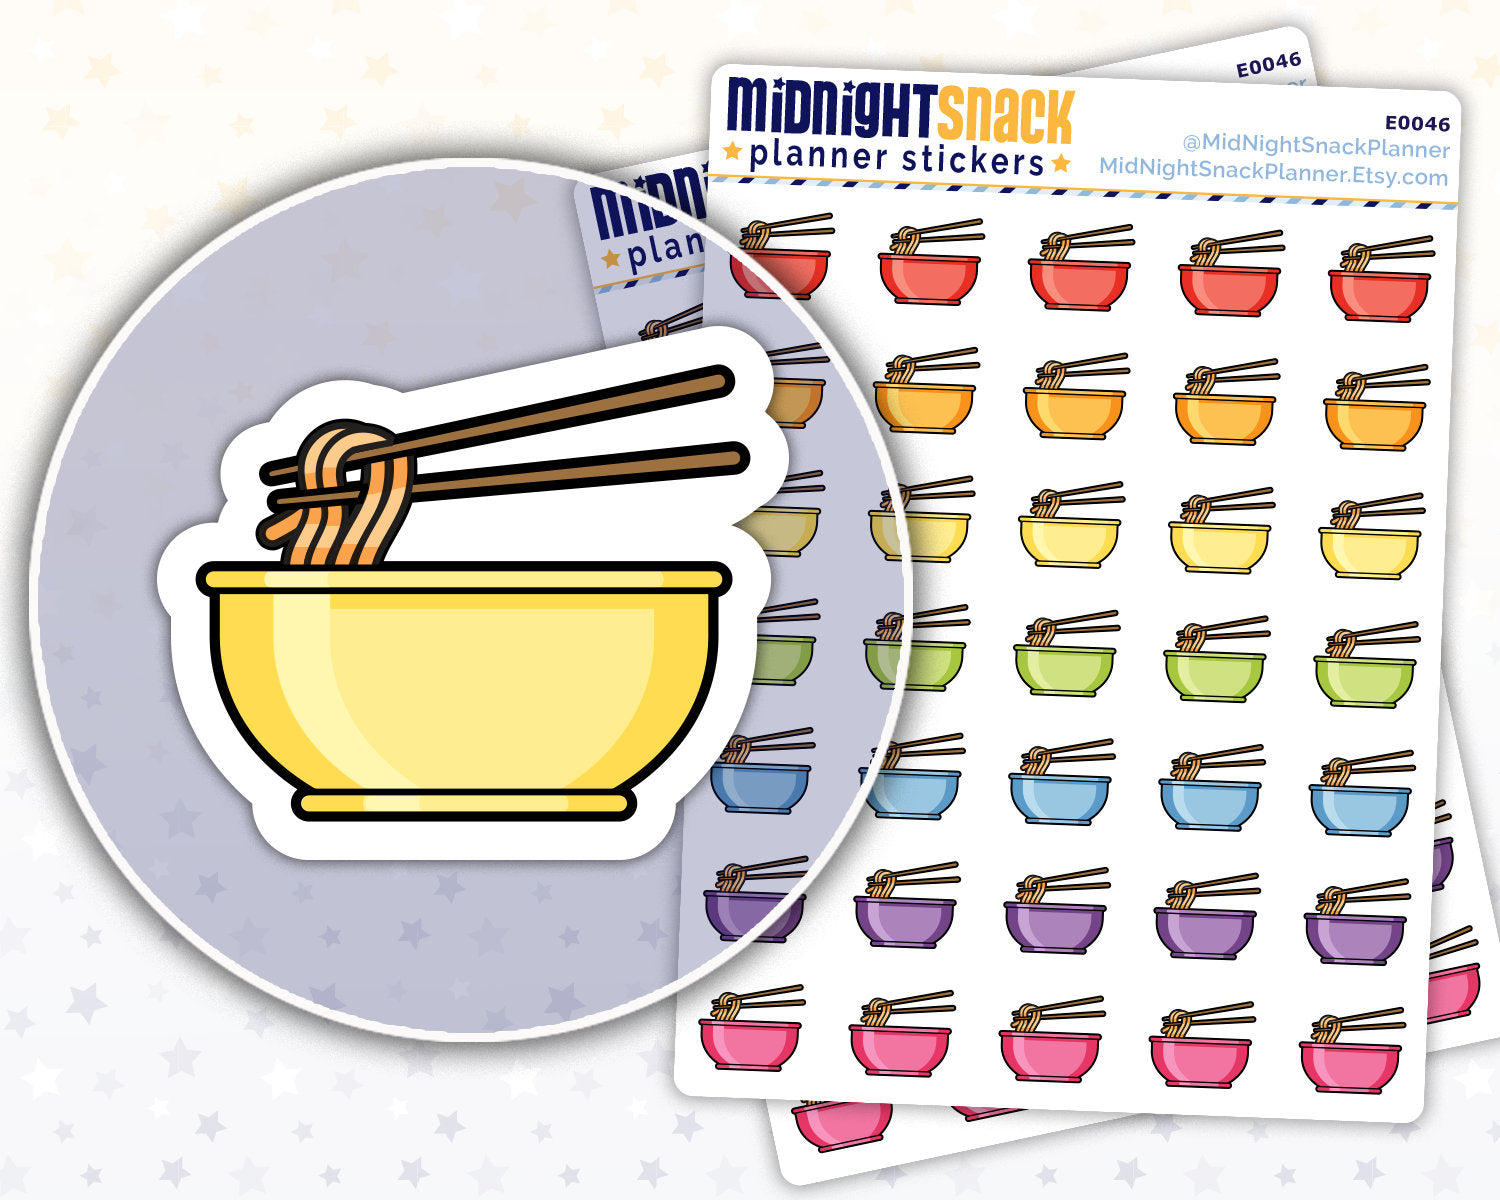 Order Asian Food Icon: Meal Planning Planner Stickers Midnight Snack Planner